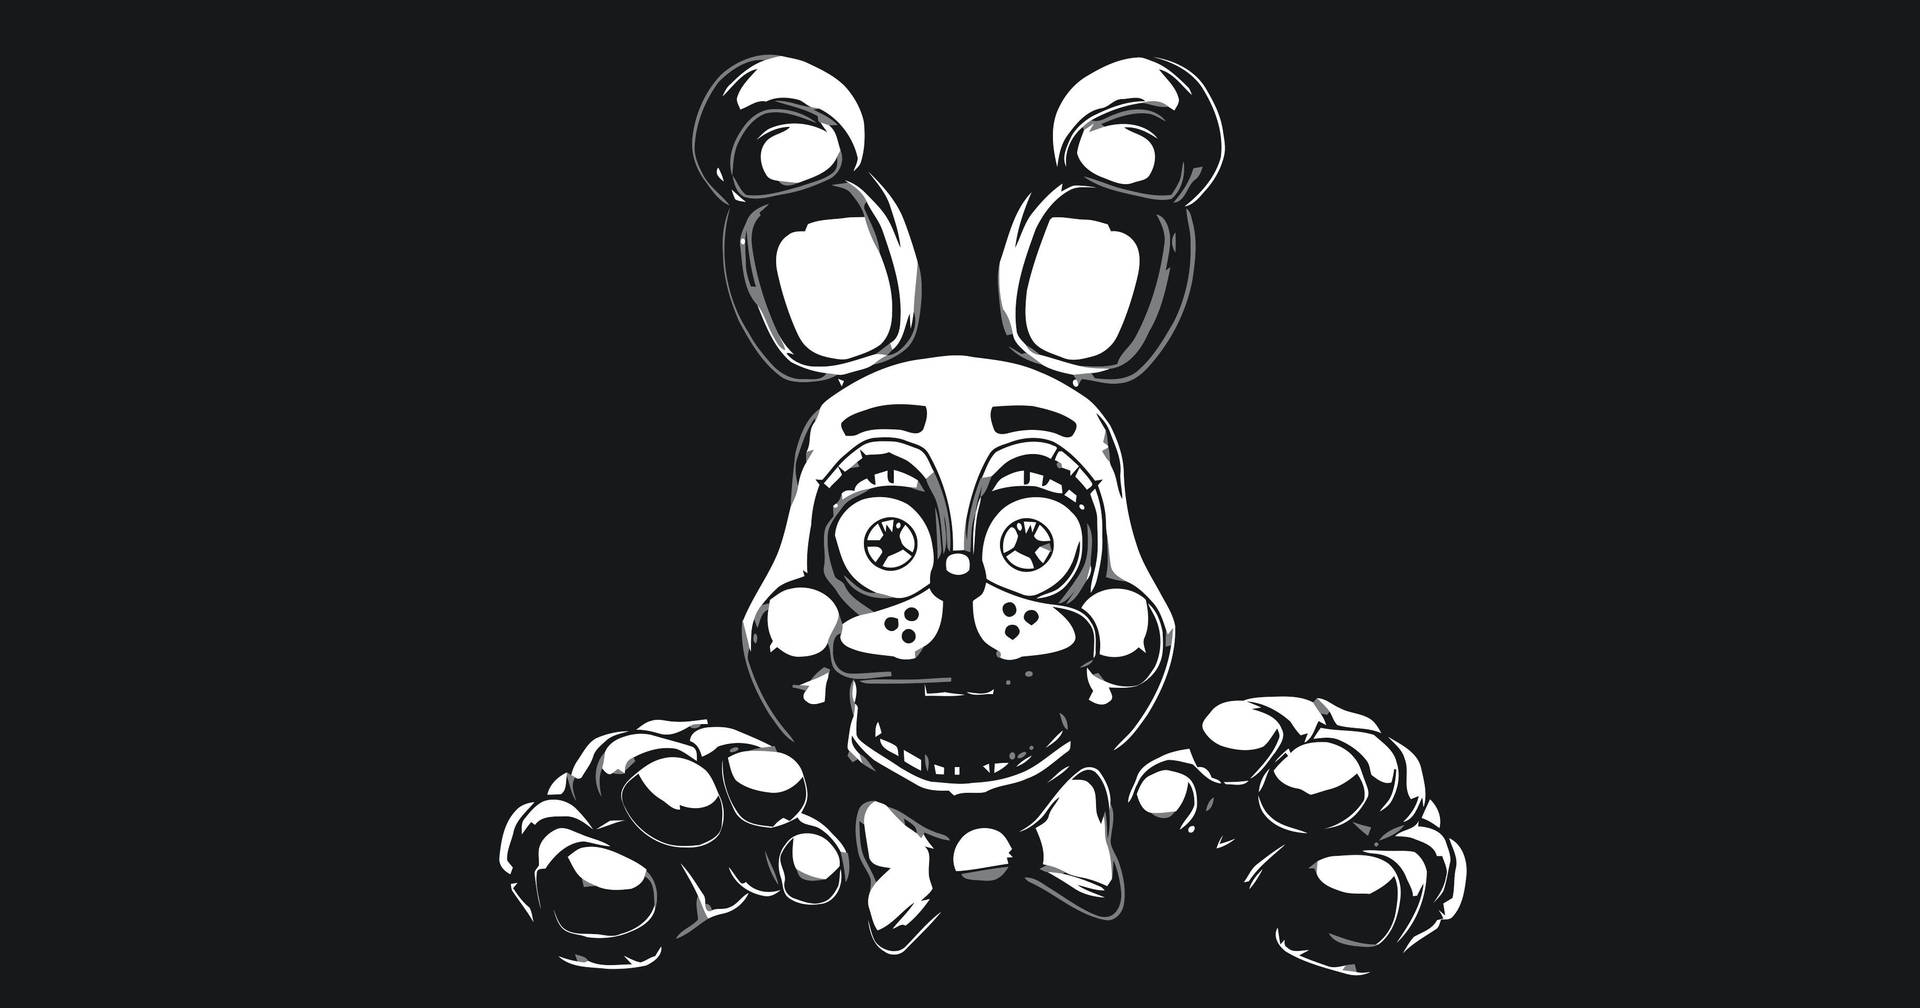 Get Ready for a Night of Frights with Fnaf Bonnie Wallpaper